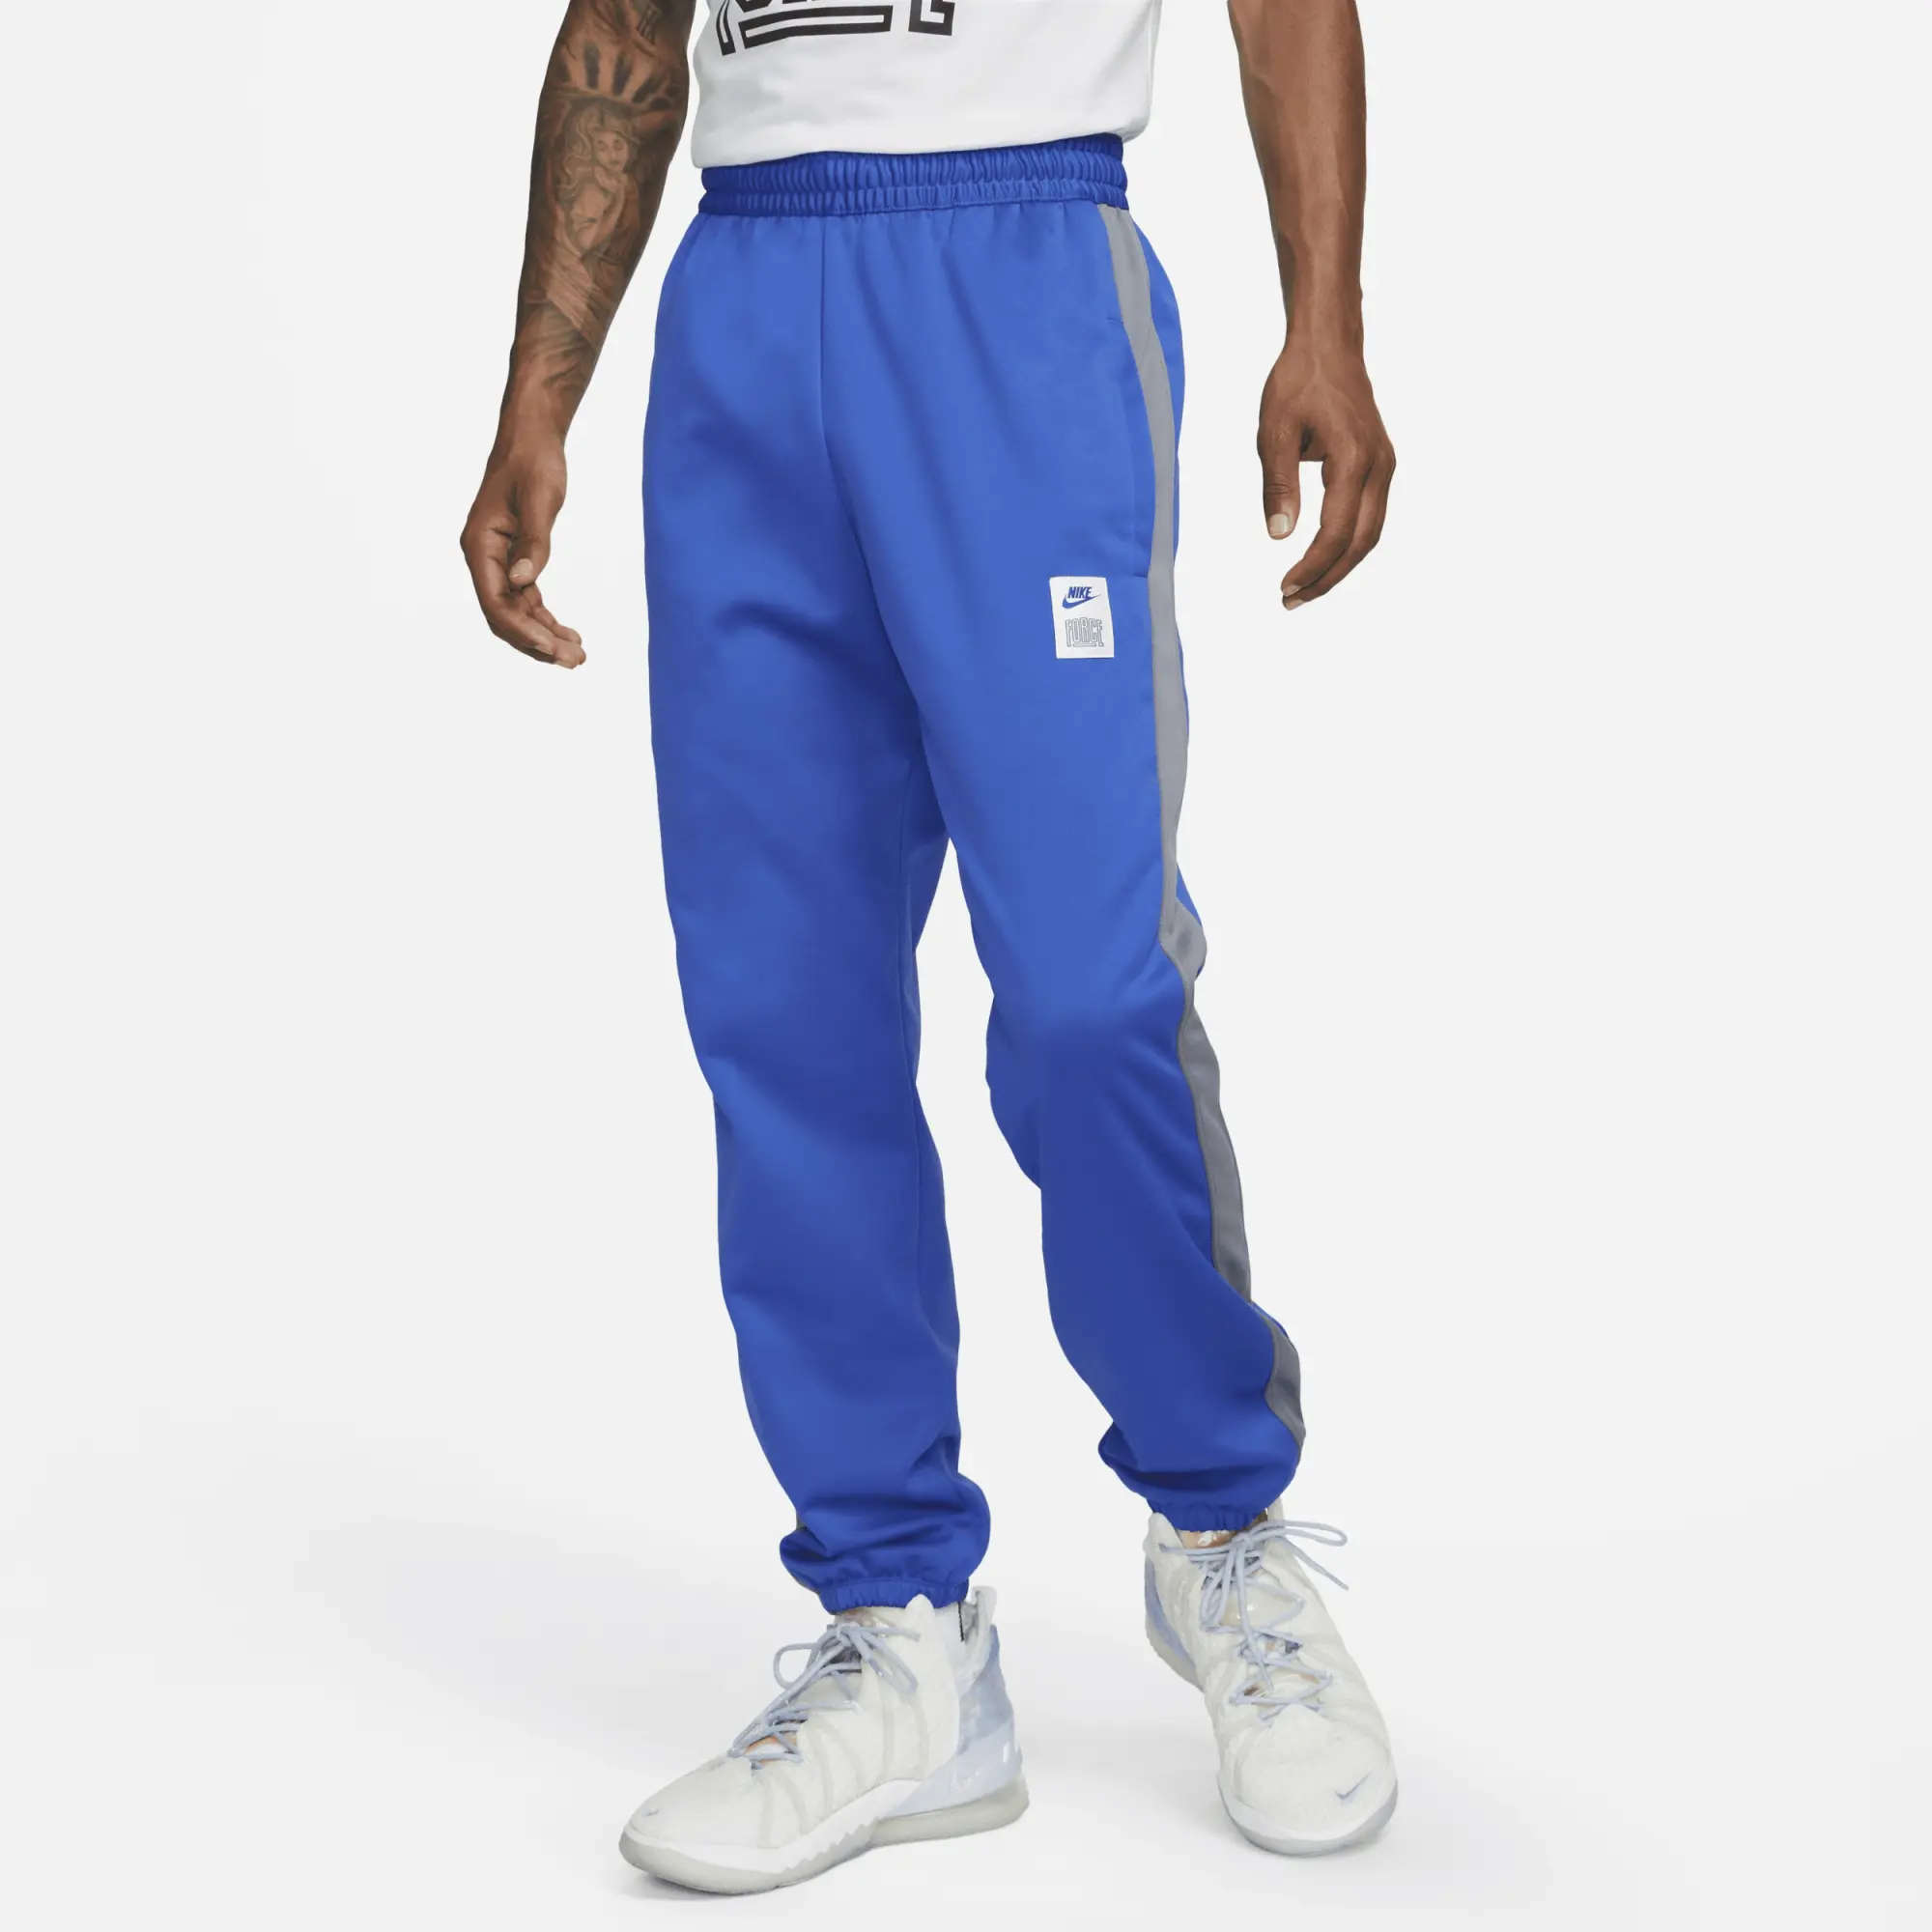 Nike Starting 5 Men's Therma-FIT Basketball Trousers - Blue